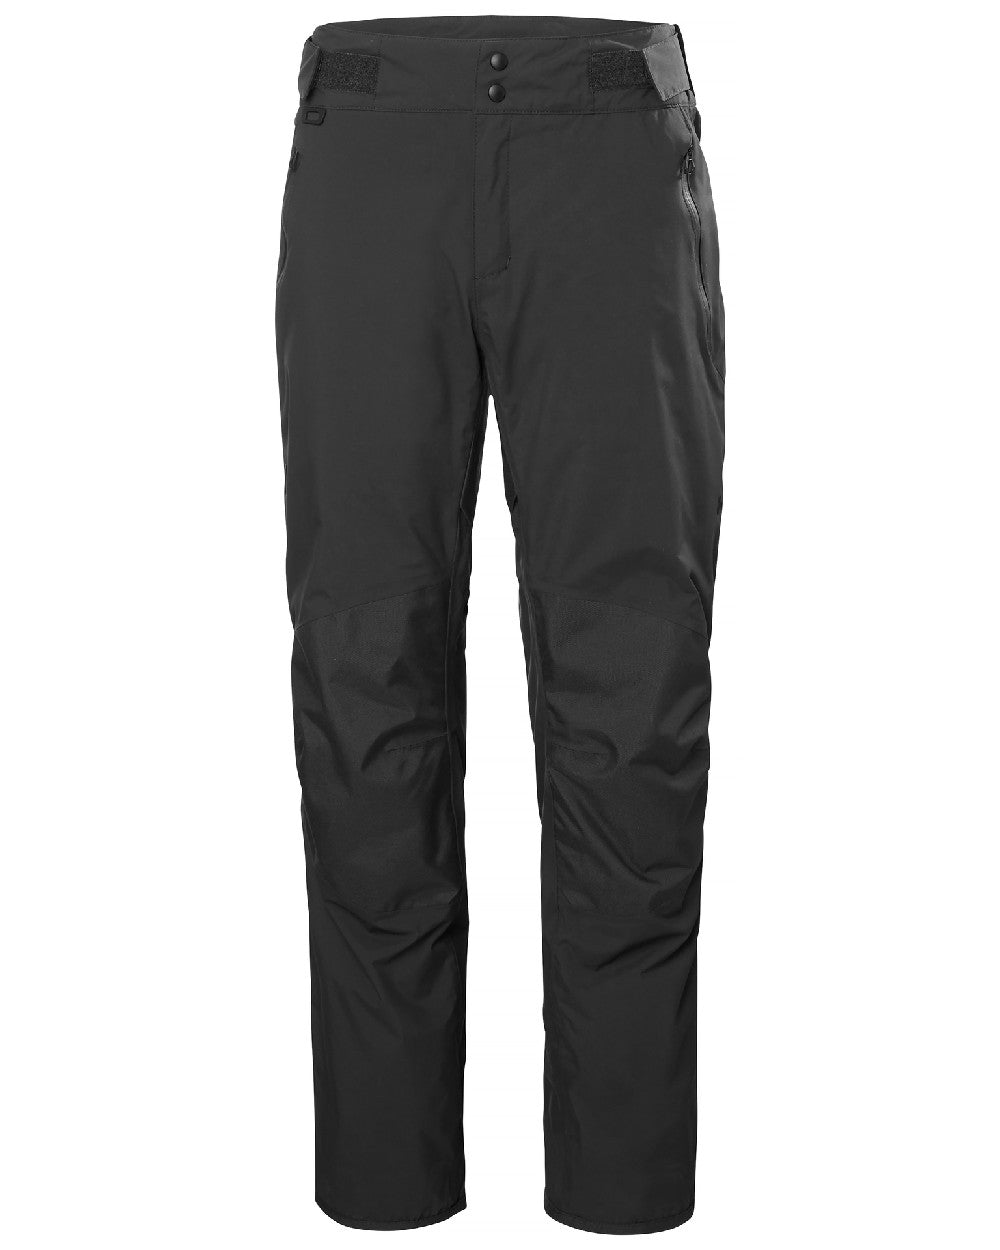 Ebony coloured Helly Hansen Womens HP Foil Sailing Pants 2.0 on white background 